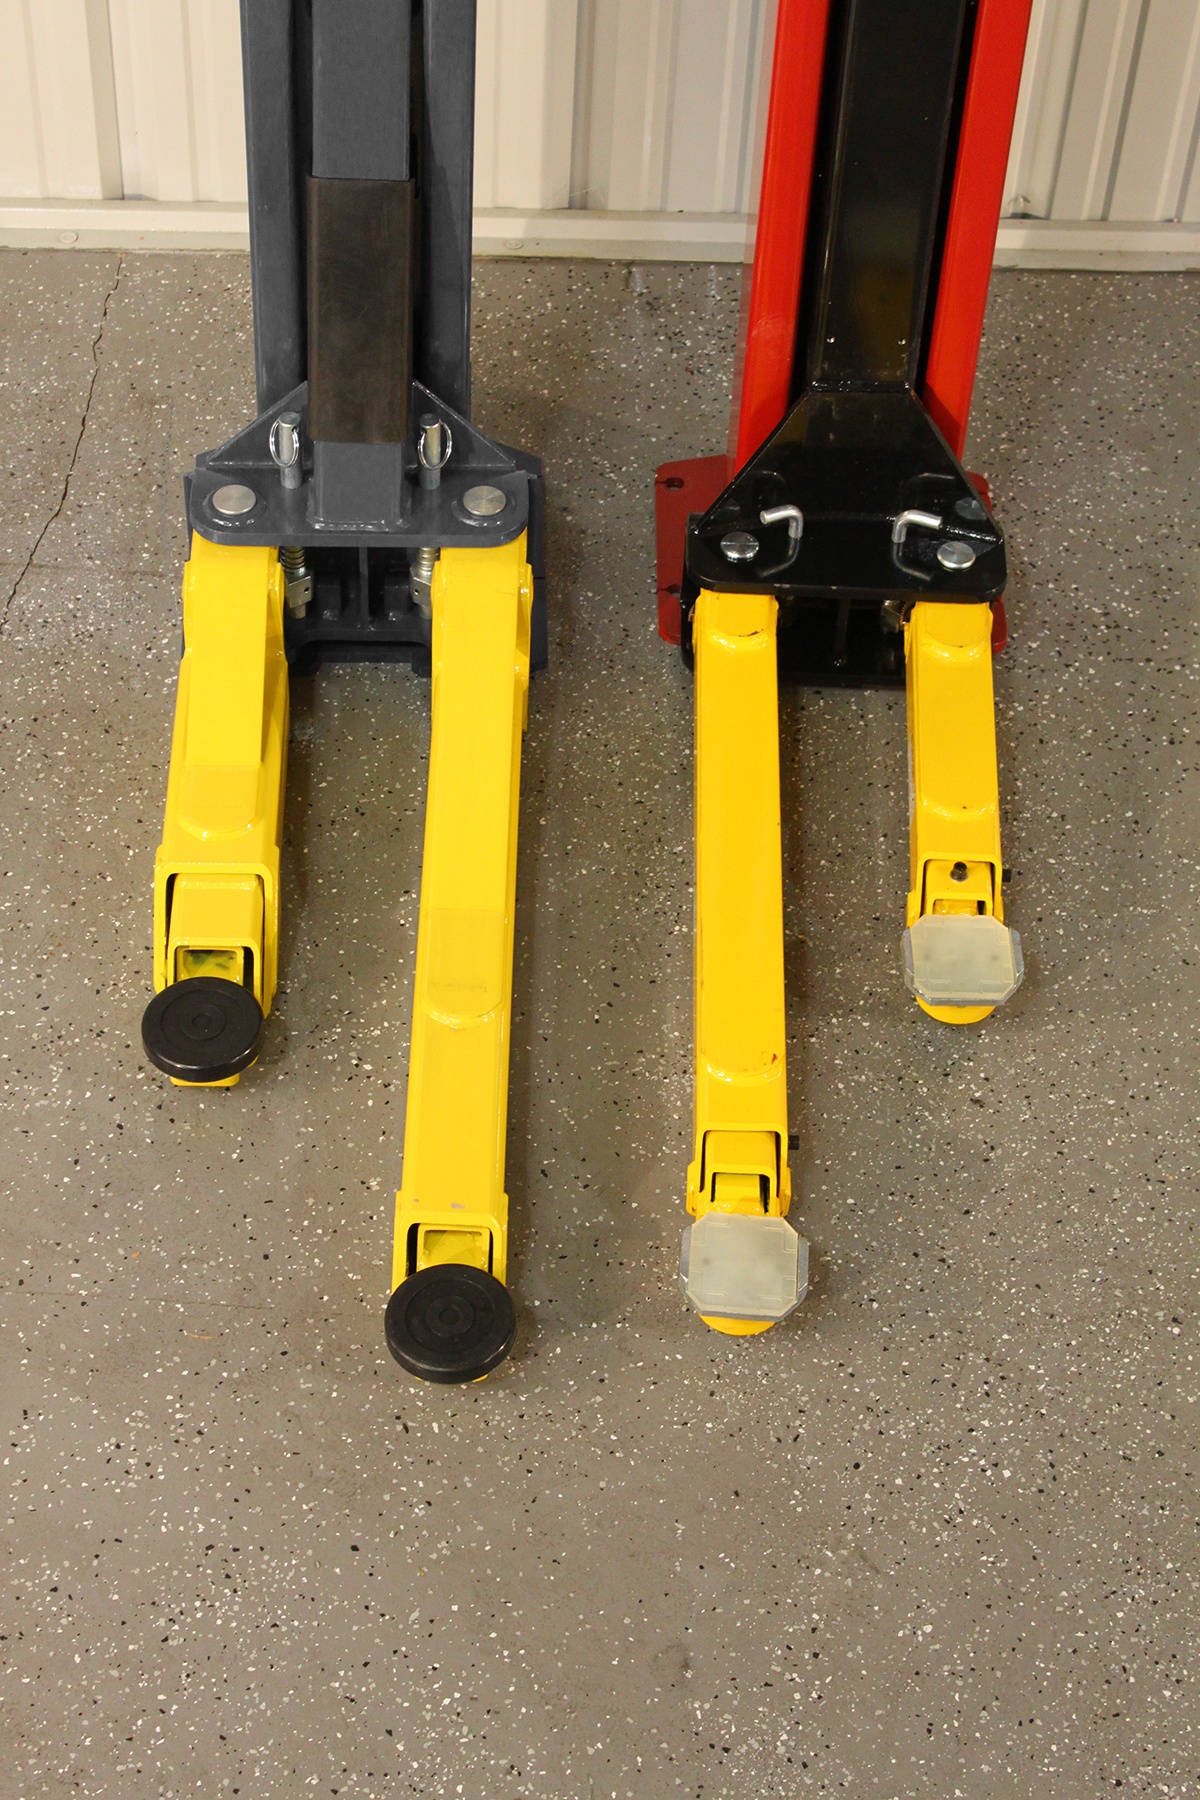 BendPak Two-Post Hoist Compared to Challenger Lift Arms Retracted